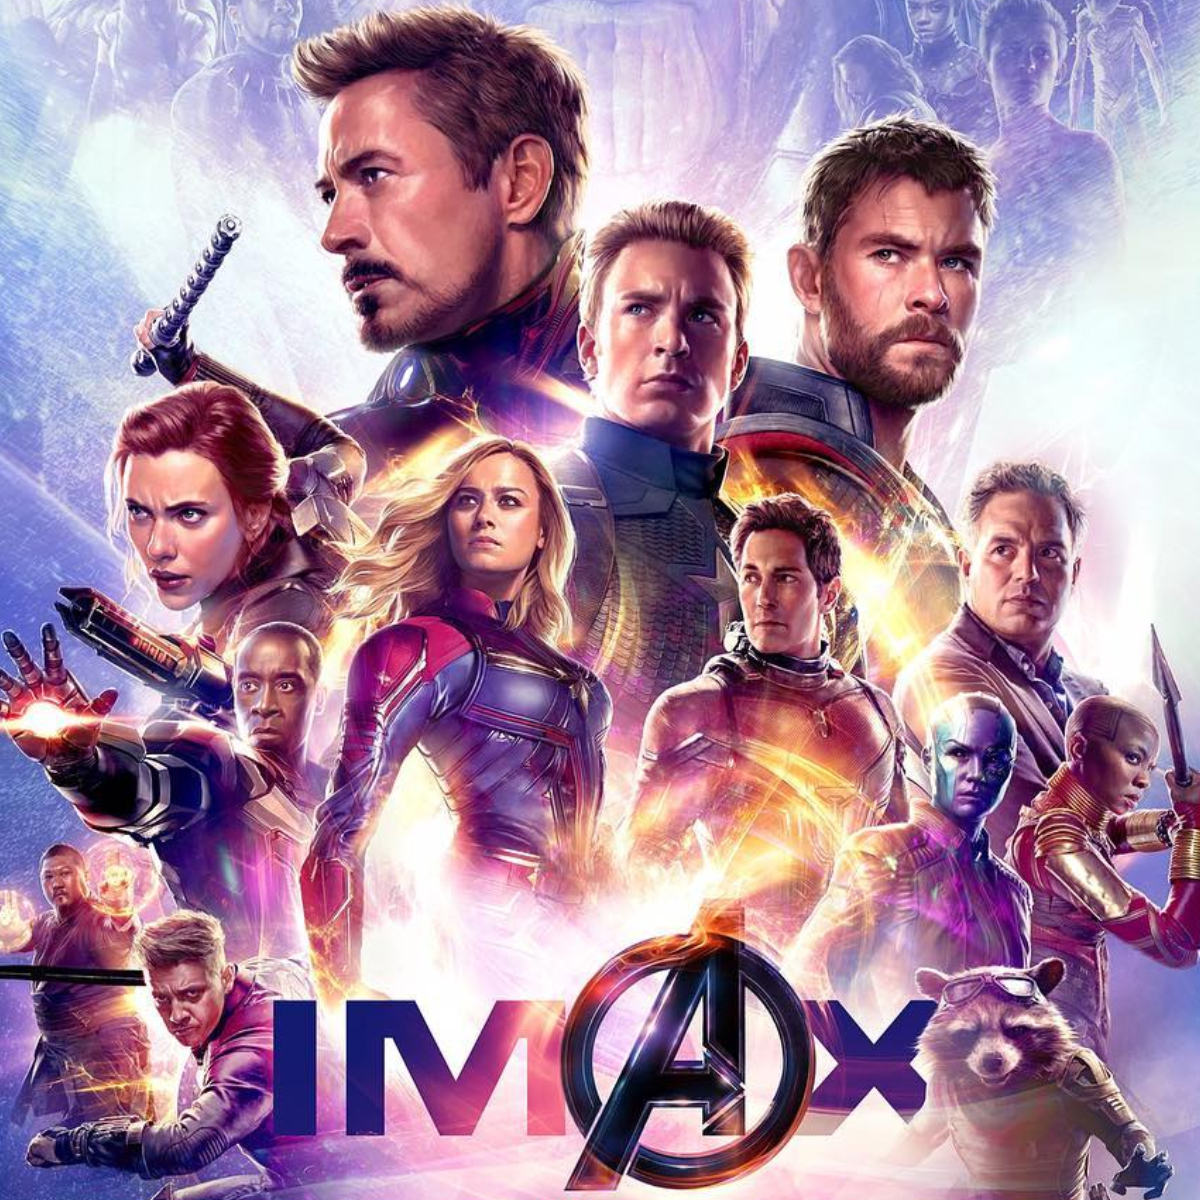 Avengers: Endgame First Week Box Office Collection India: Robert Downey Jr's film crosses the 250 crore mark